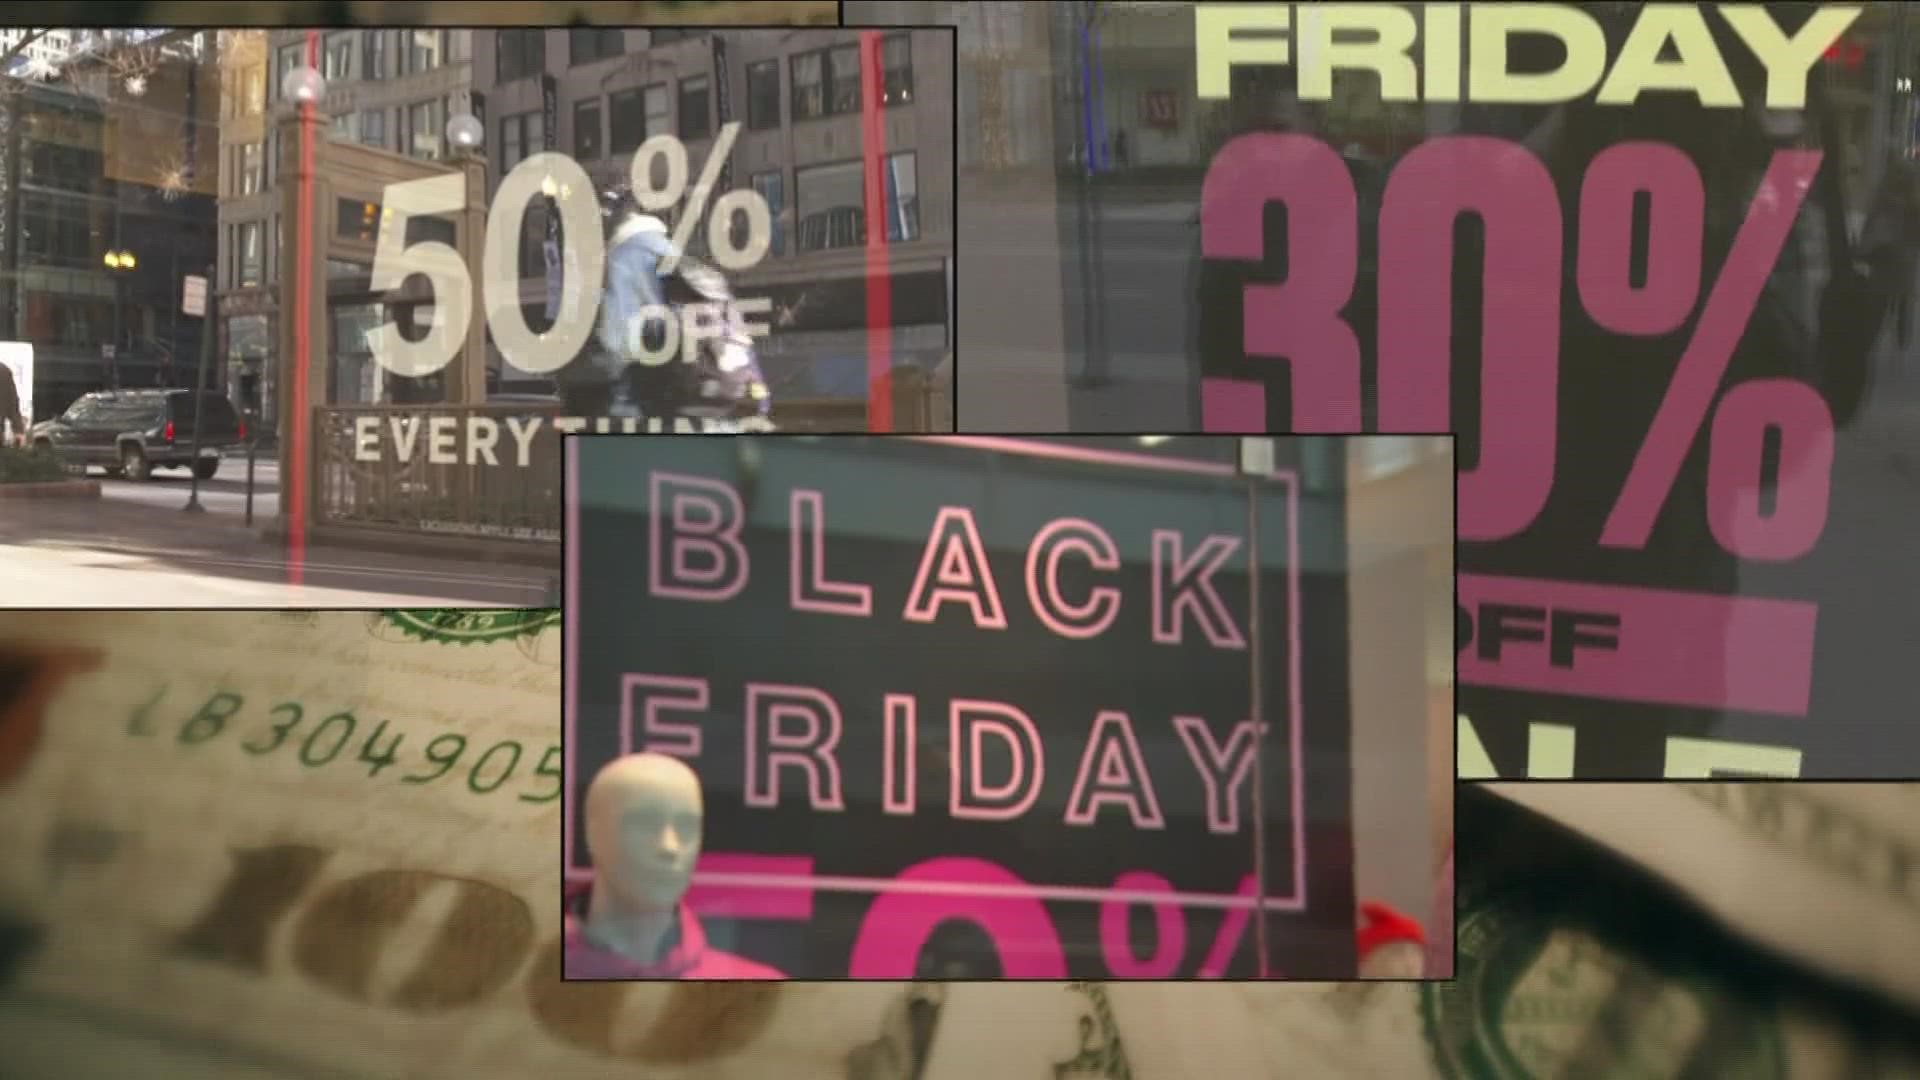 Even though Black Friday may not be what it used to be, retailers expect to see 8 million more shoppers this weekend than last year.